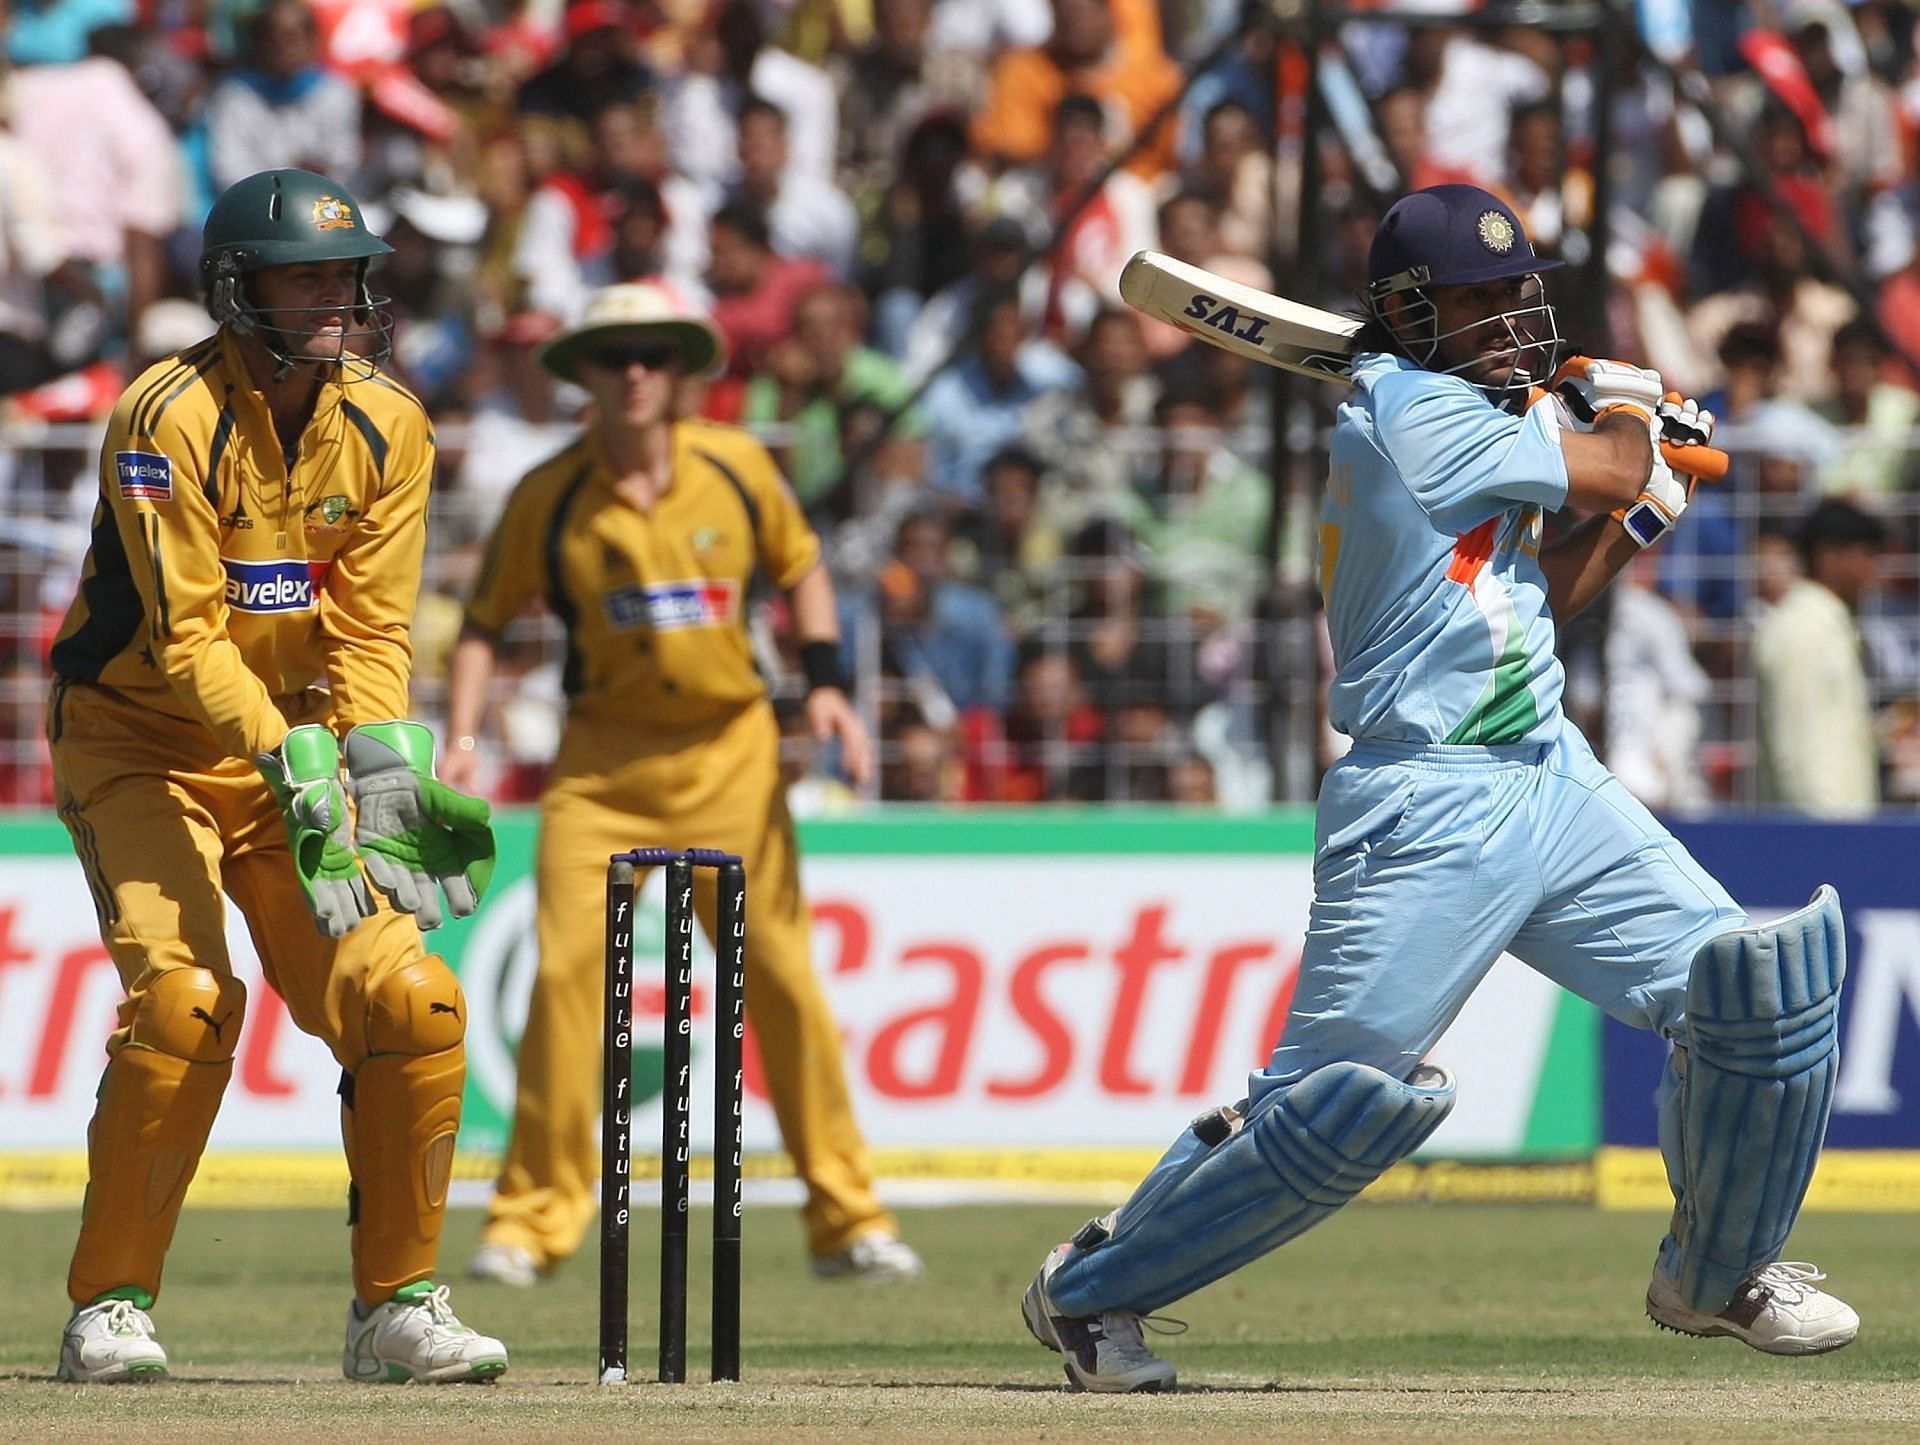 MS Dhoni playing a pull shot during an ODI against Australia in 2007. Pic: Getty Images